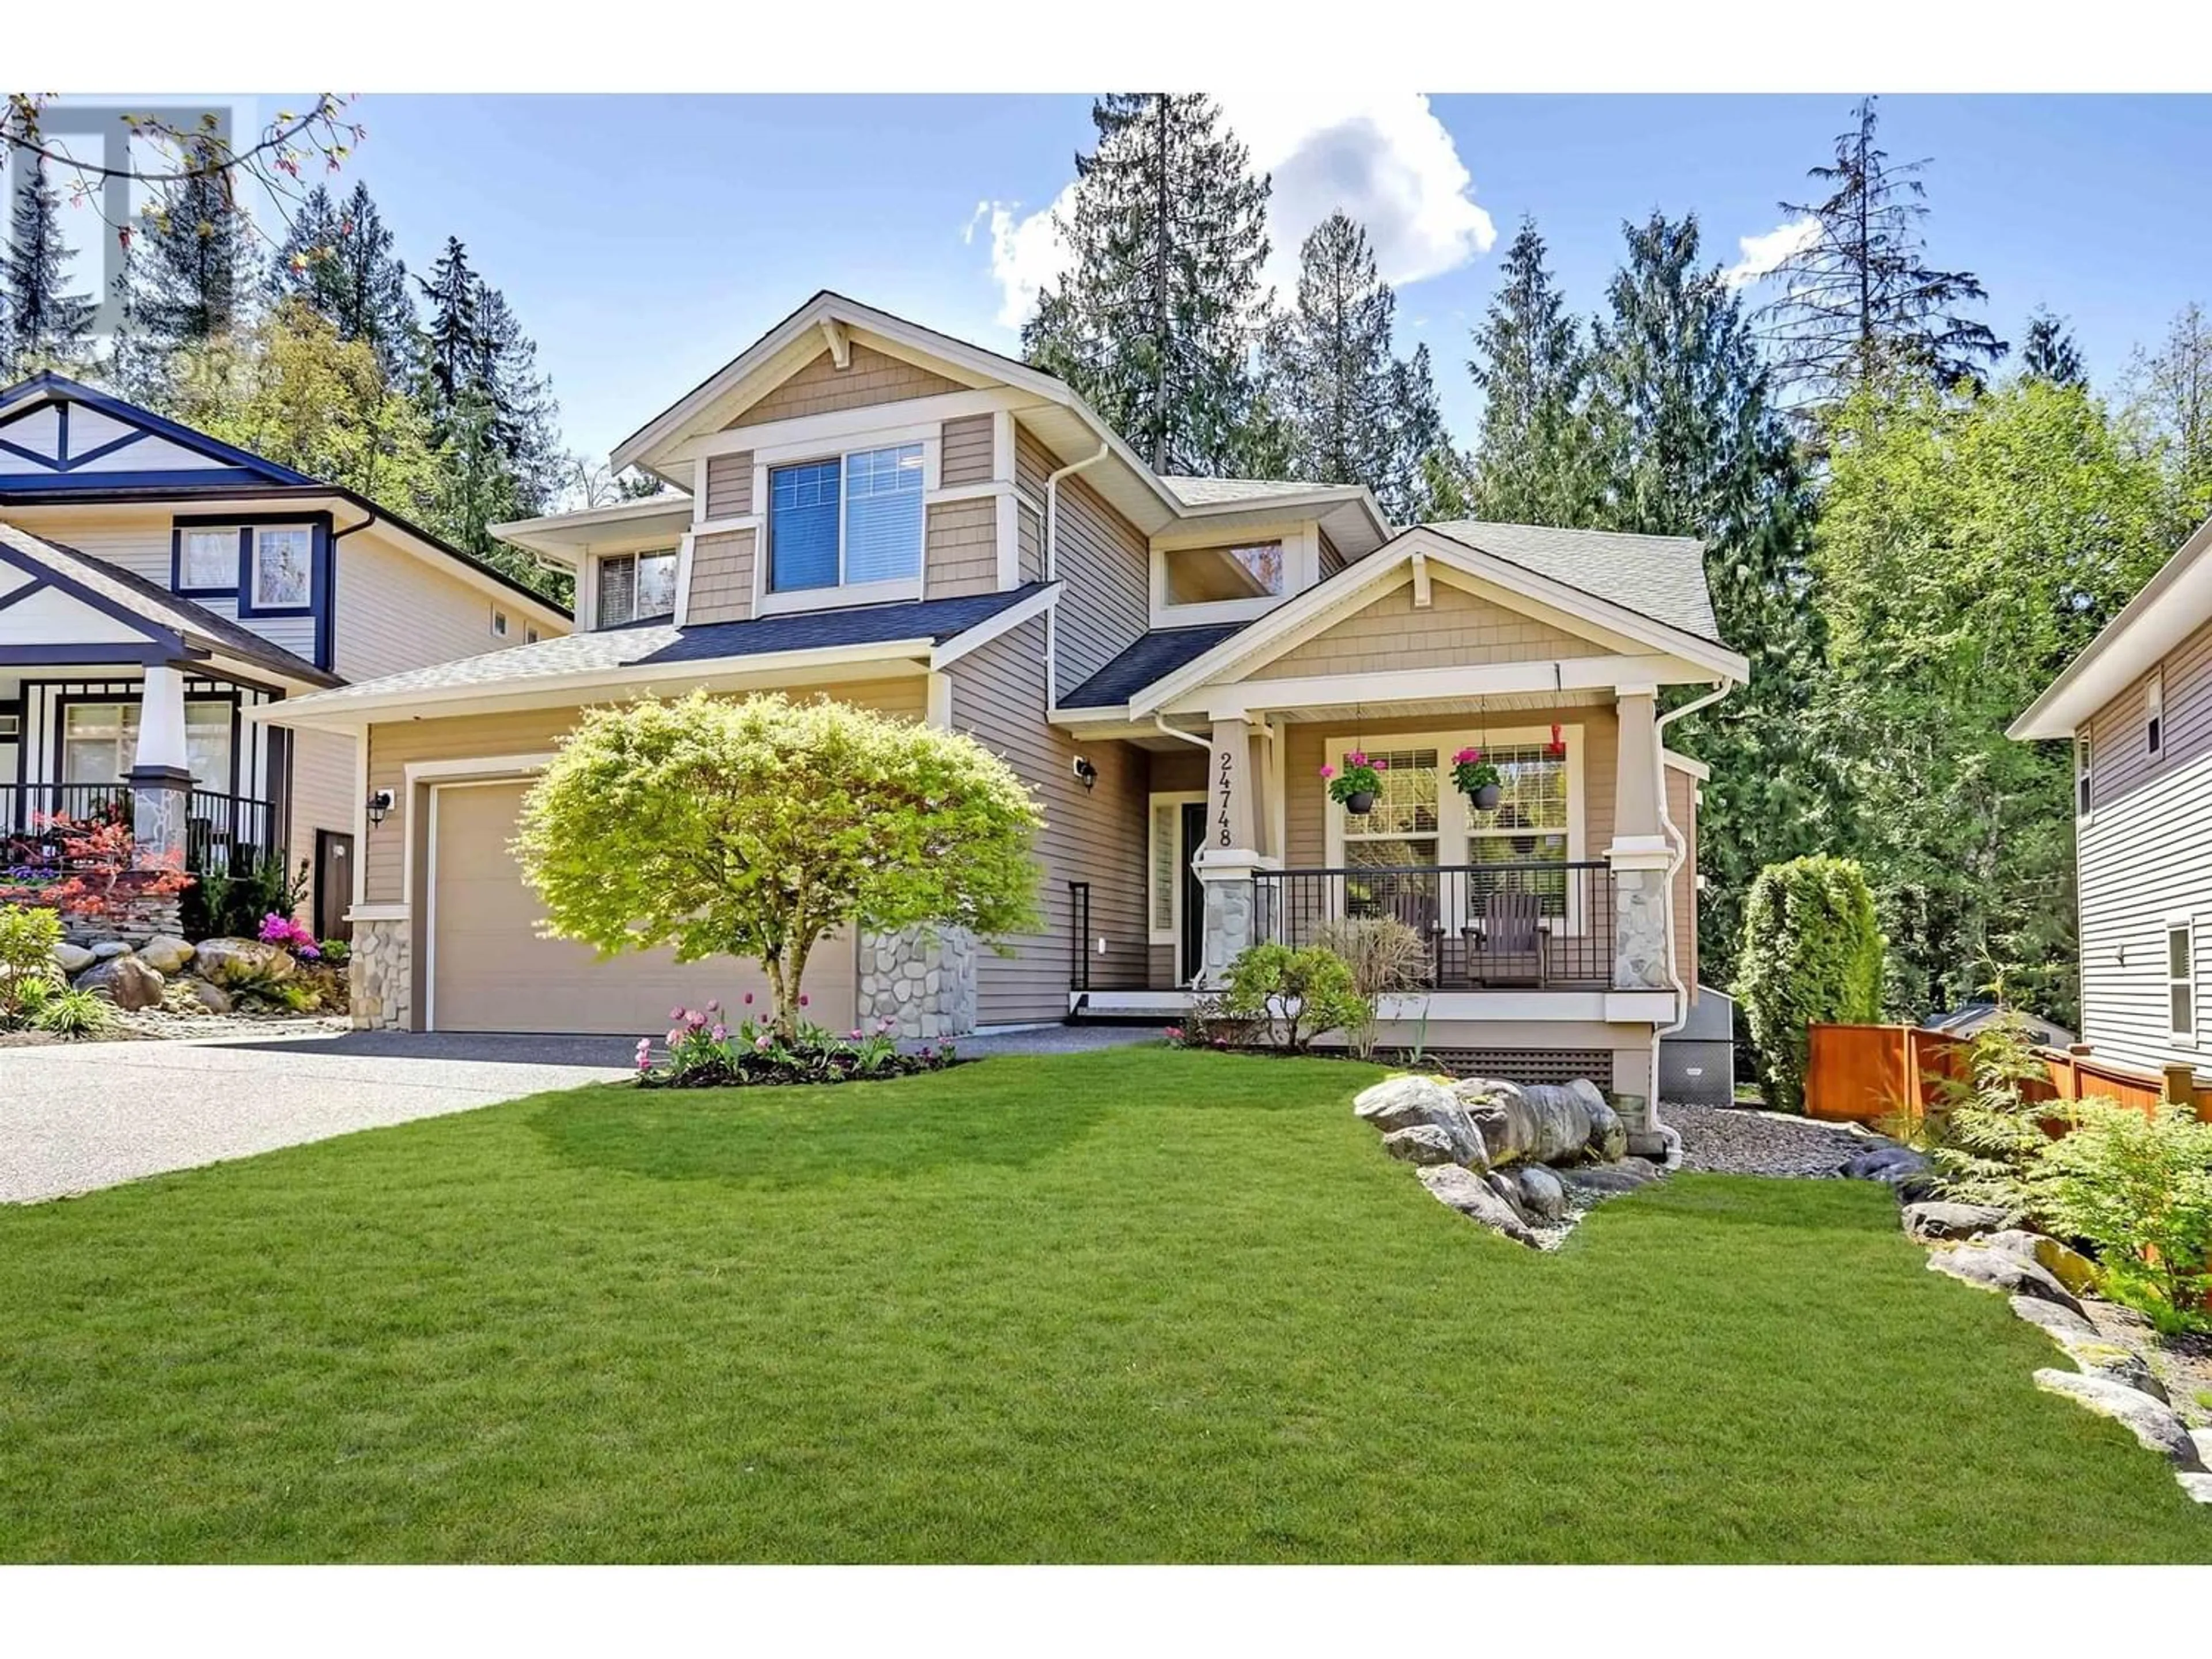 Frontside or backside of a home for 24748 KIMOLA DRIVE, Maple Ridge British Columbia V2W0A6